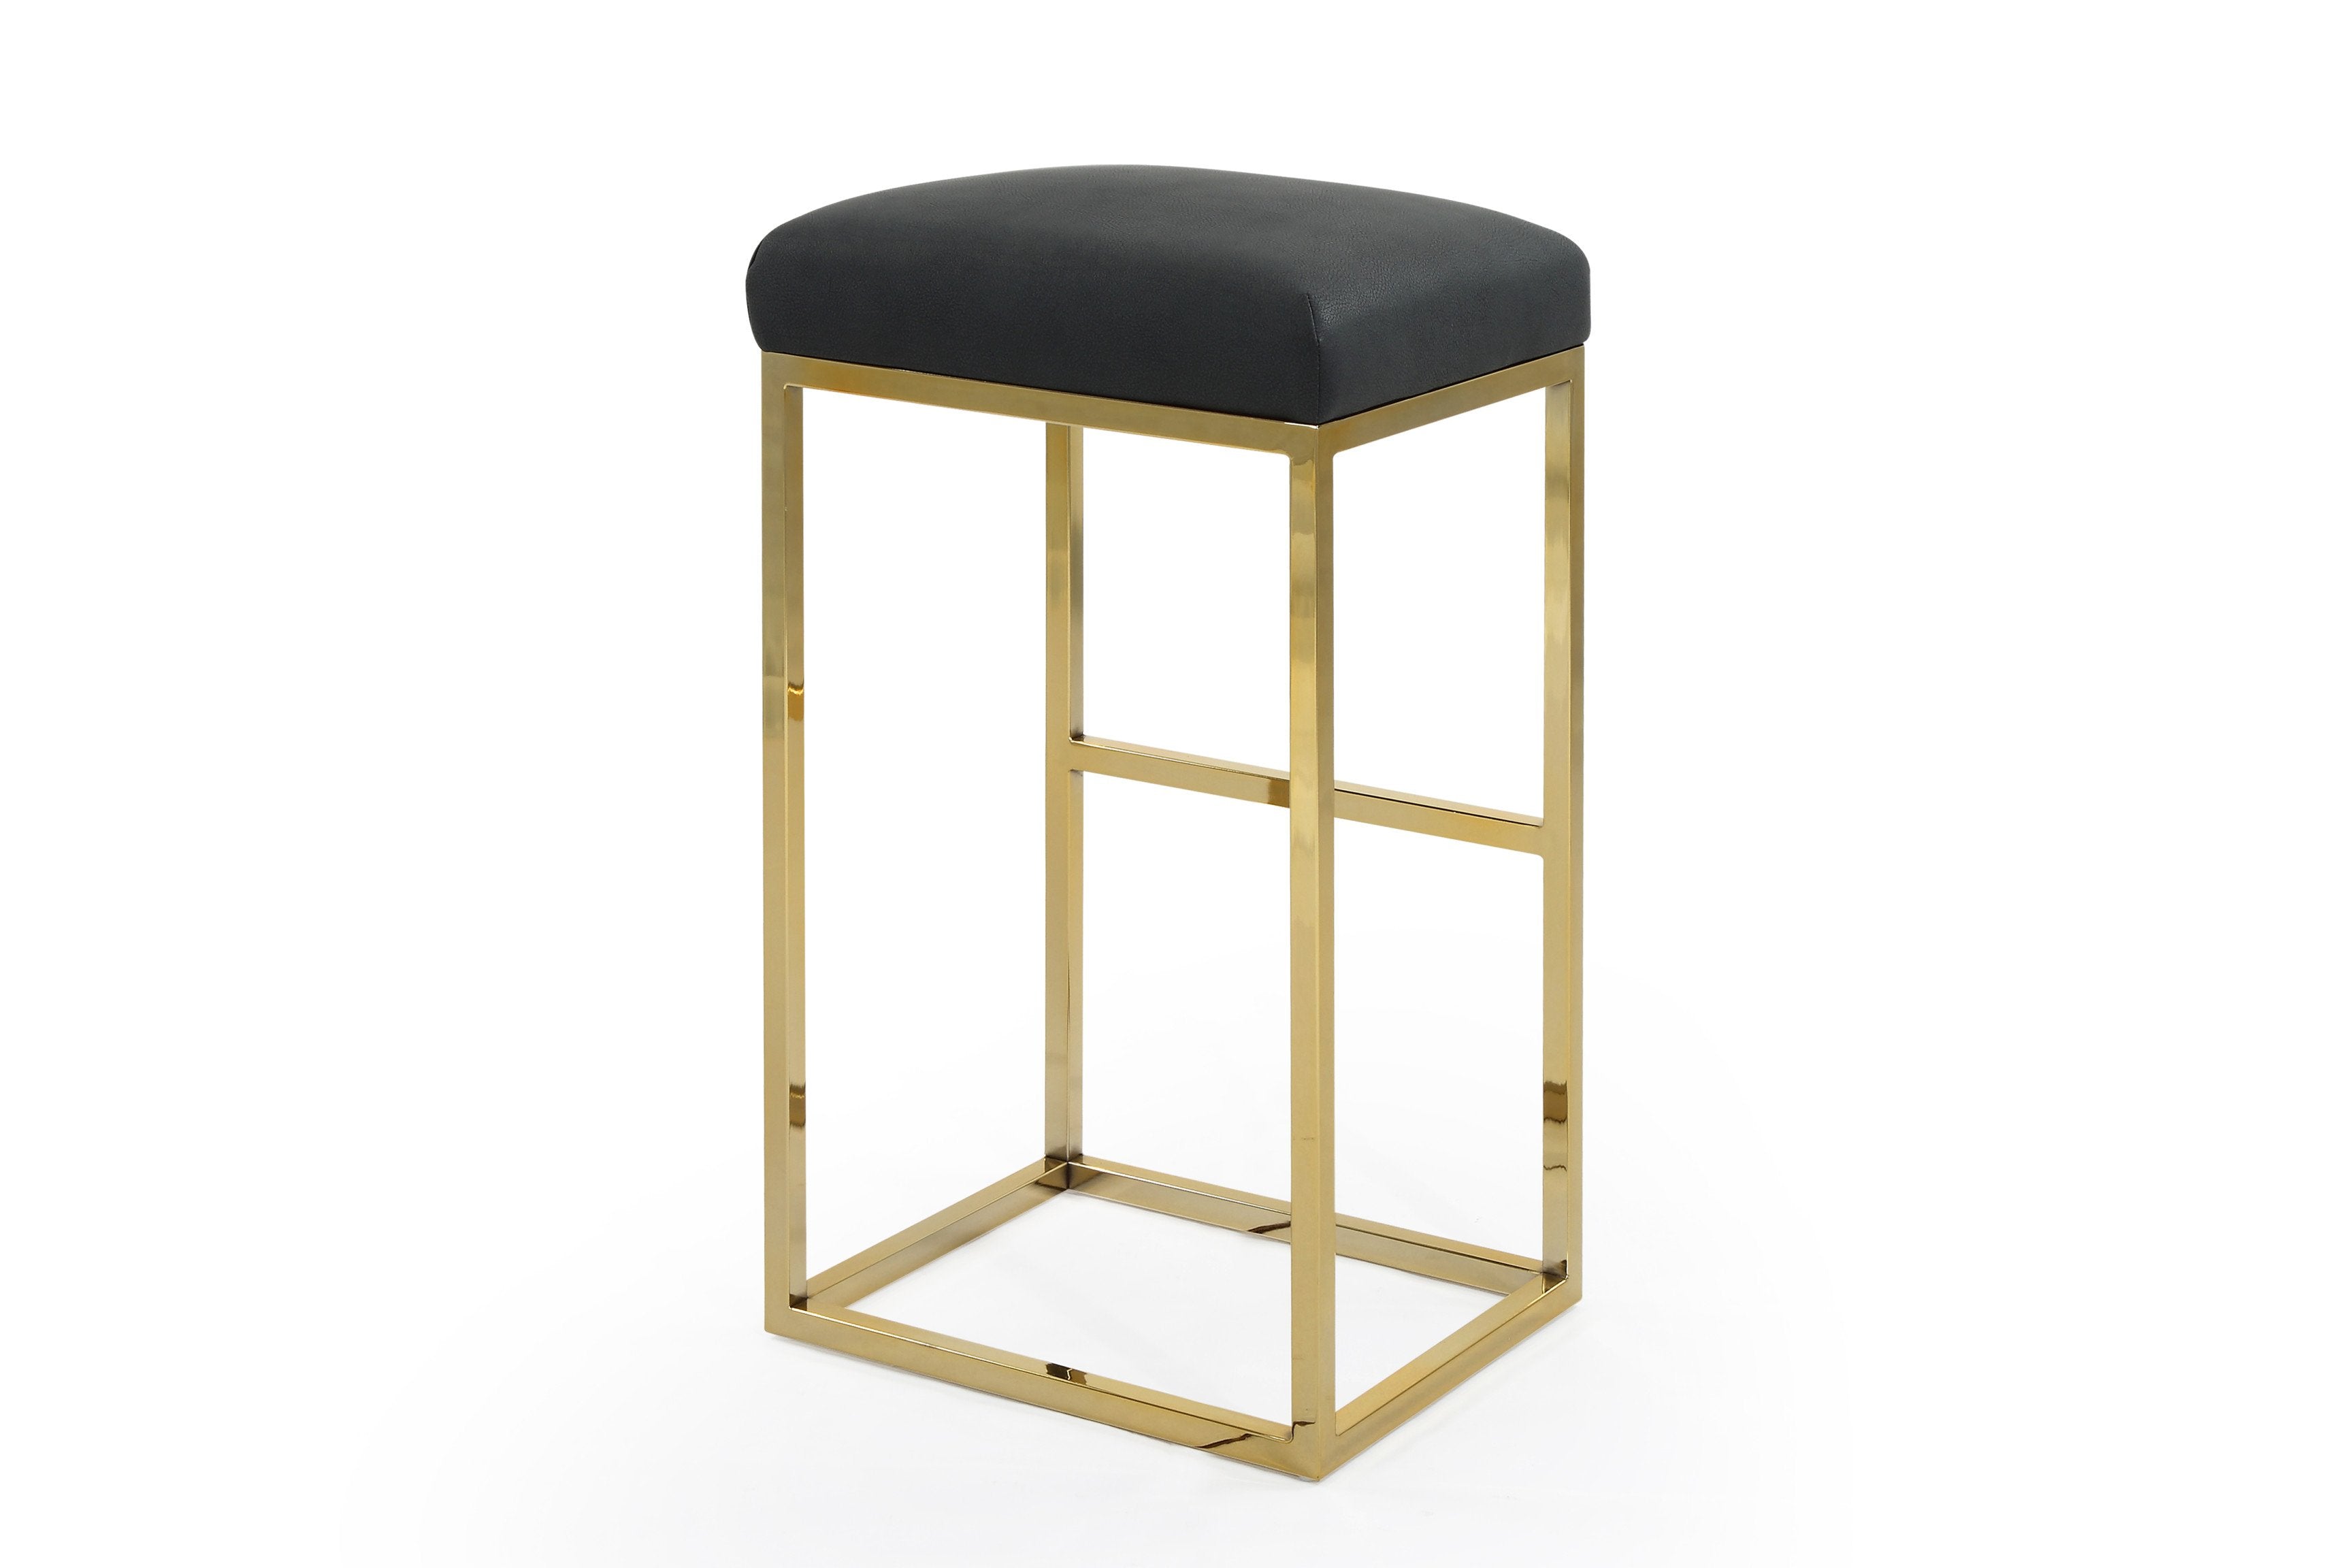 Valerie Faux Leather Bar Stool Chair Gold Base